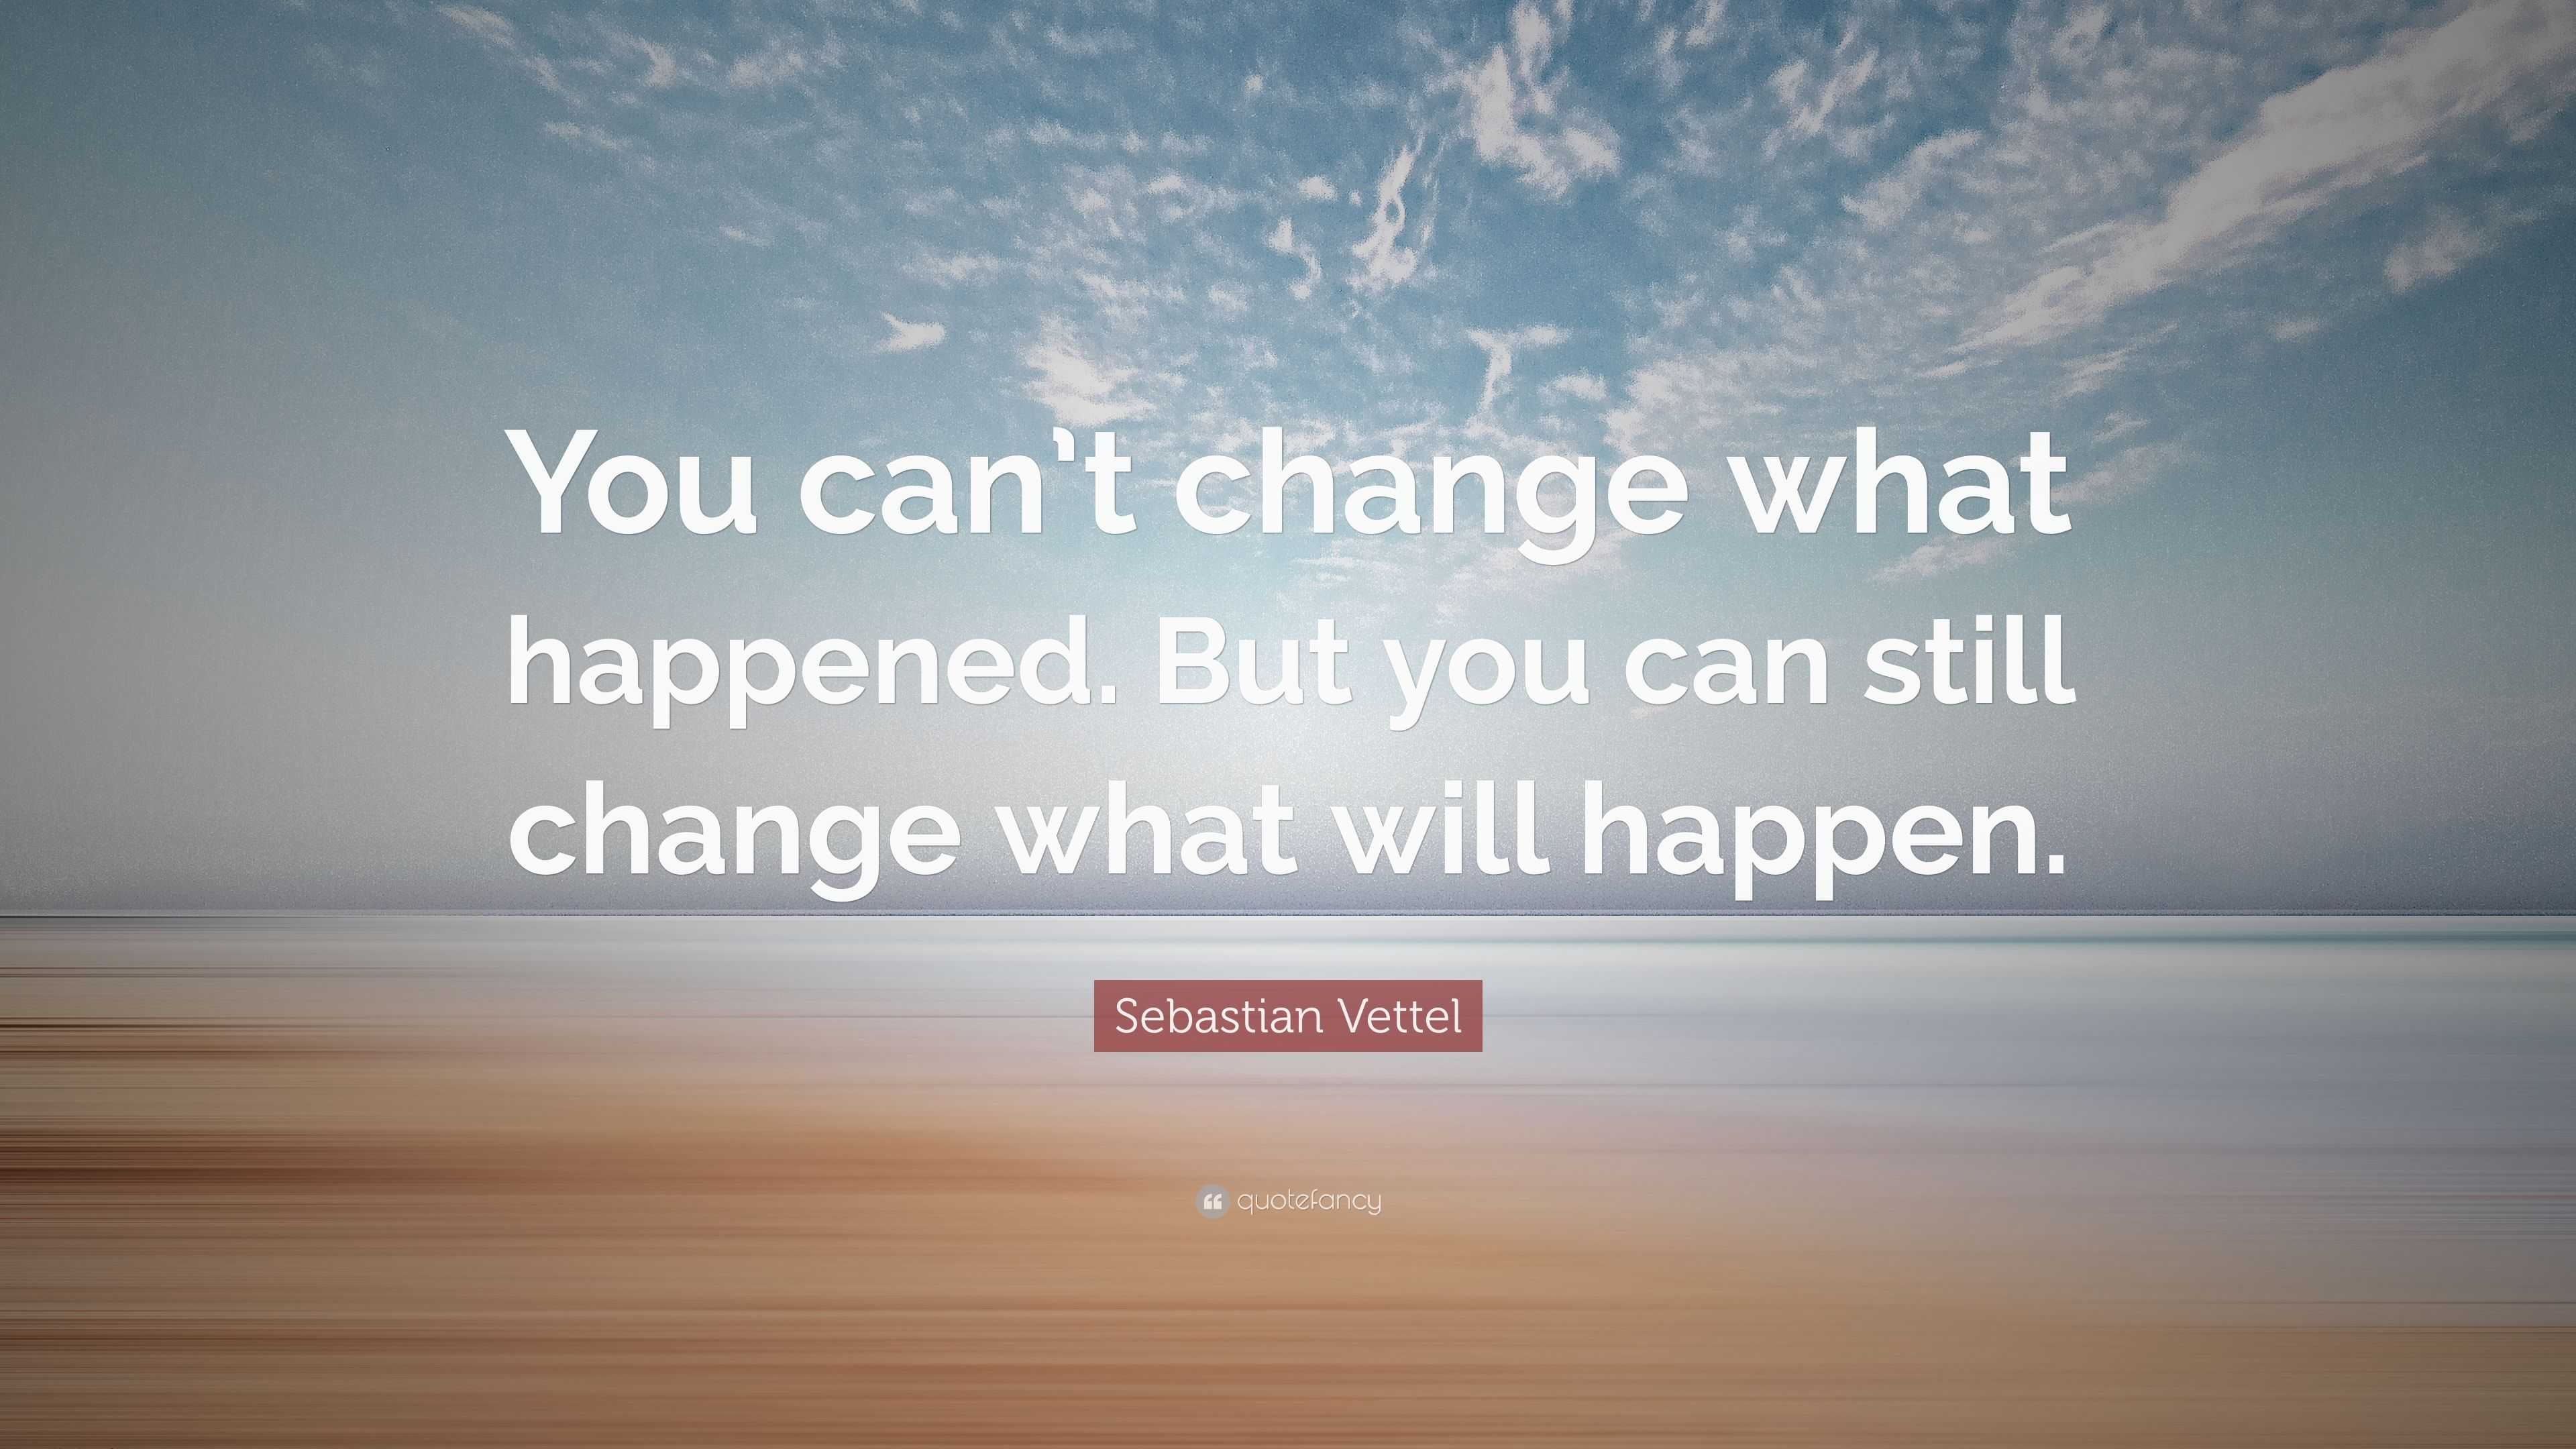 Sebastian Vettel Quote: “You can’t change what happened. But you can ...